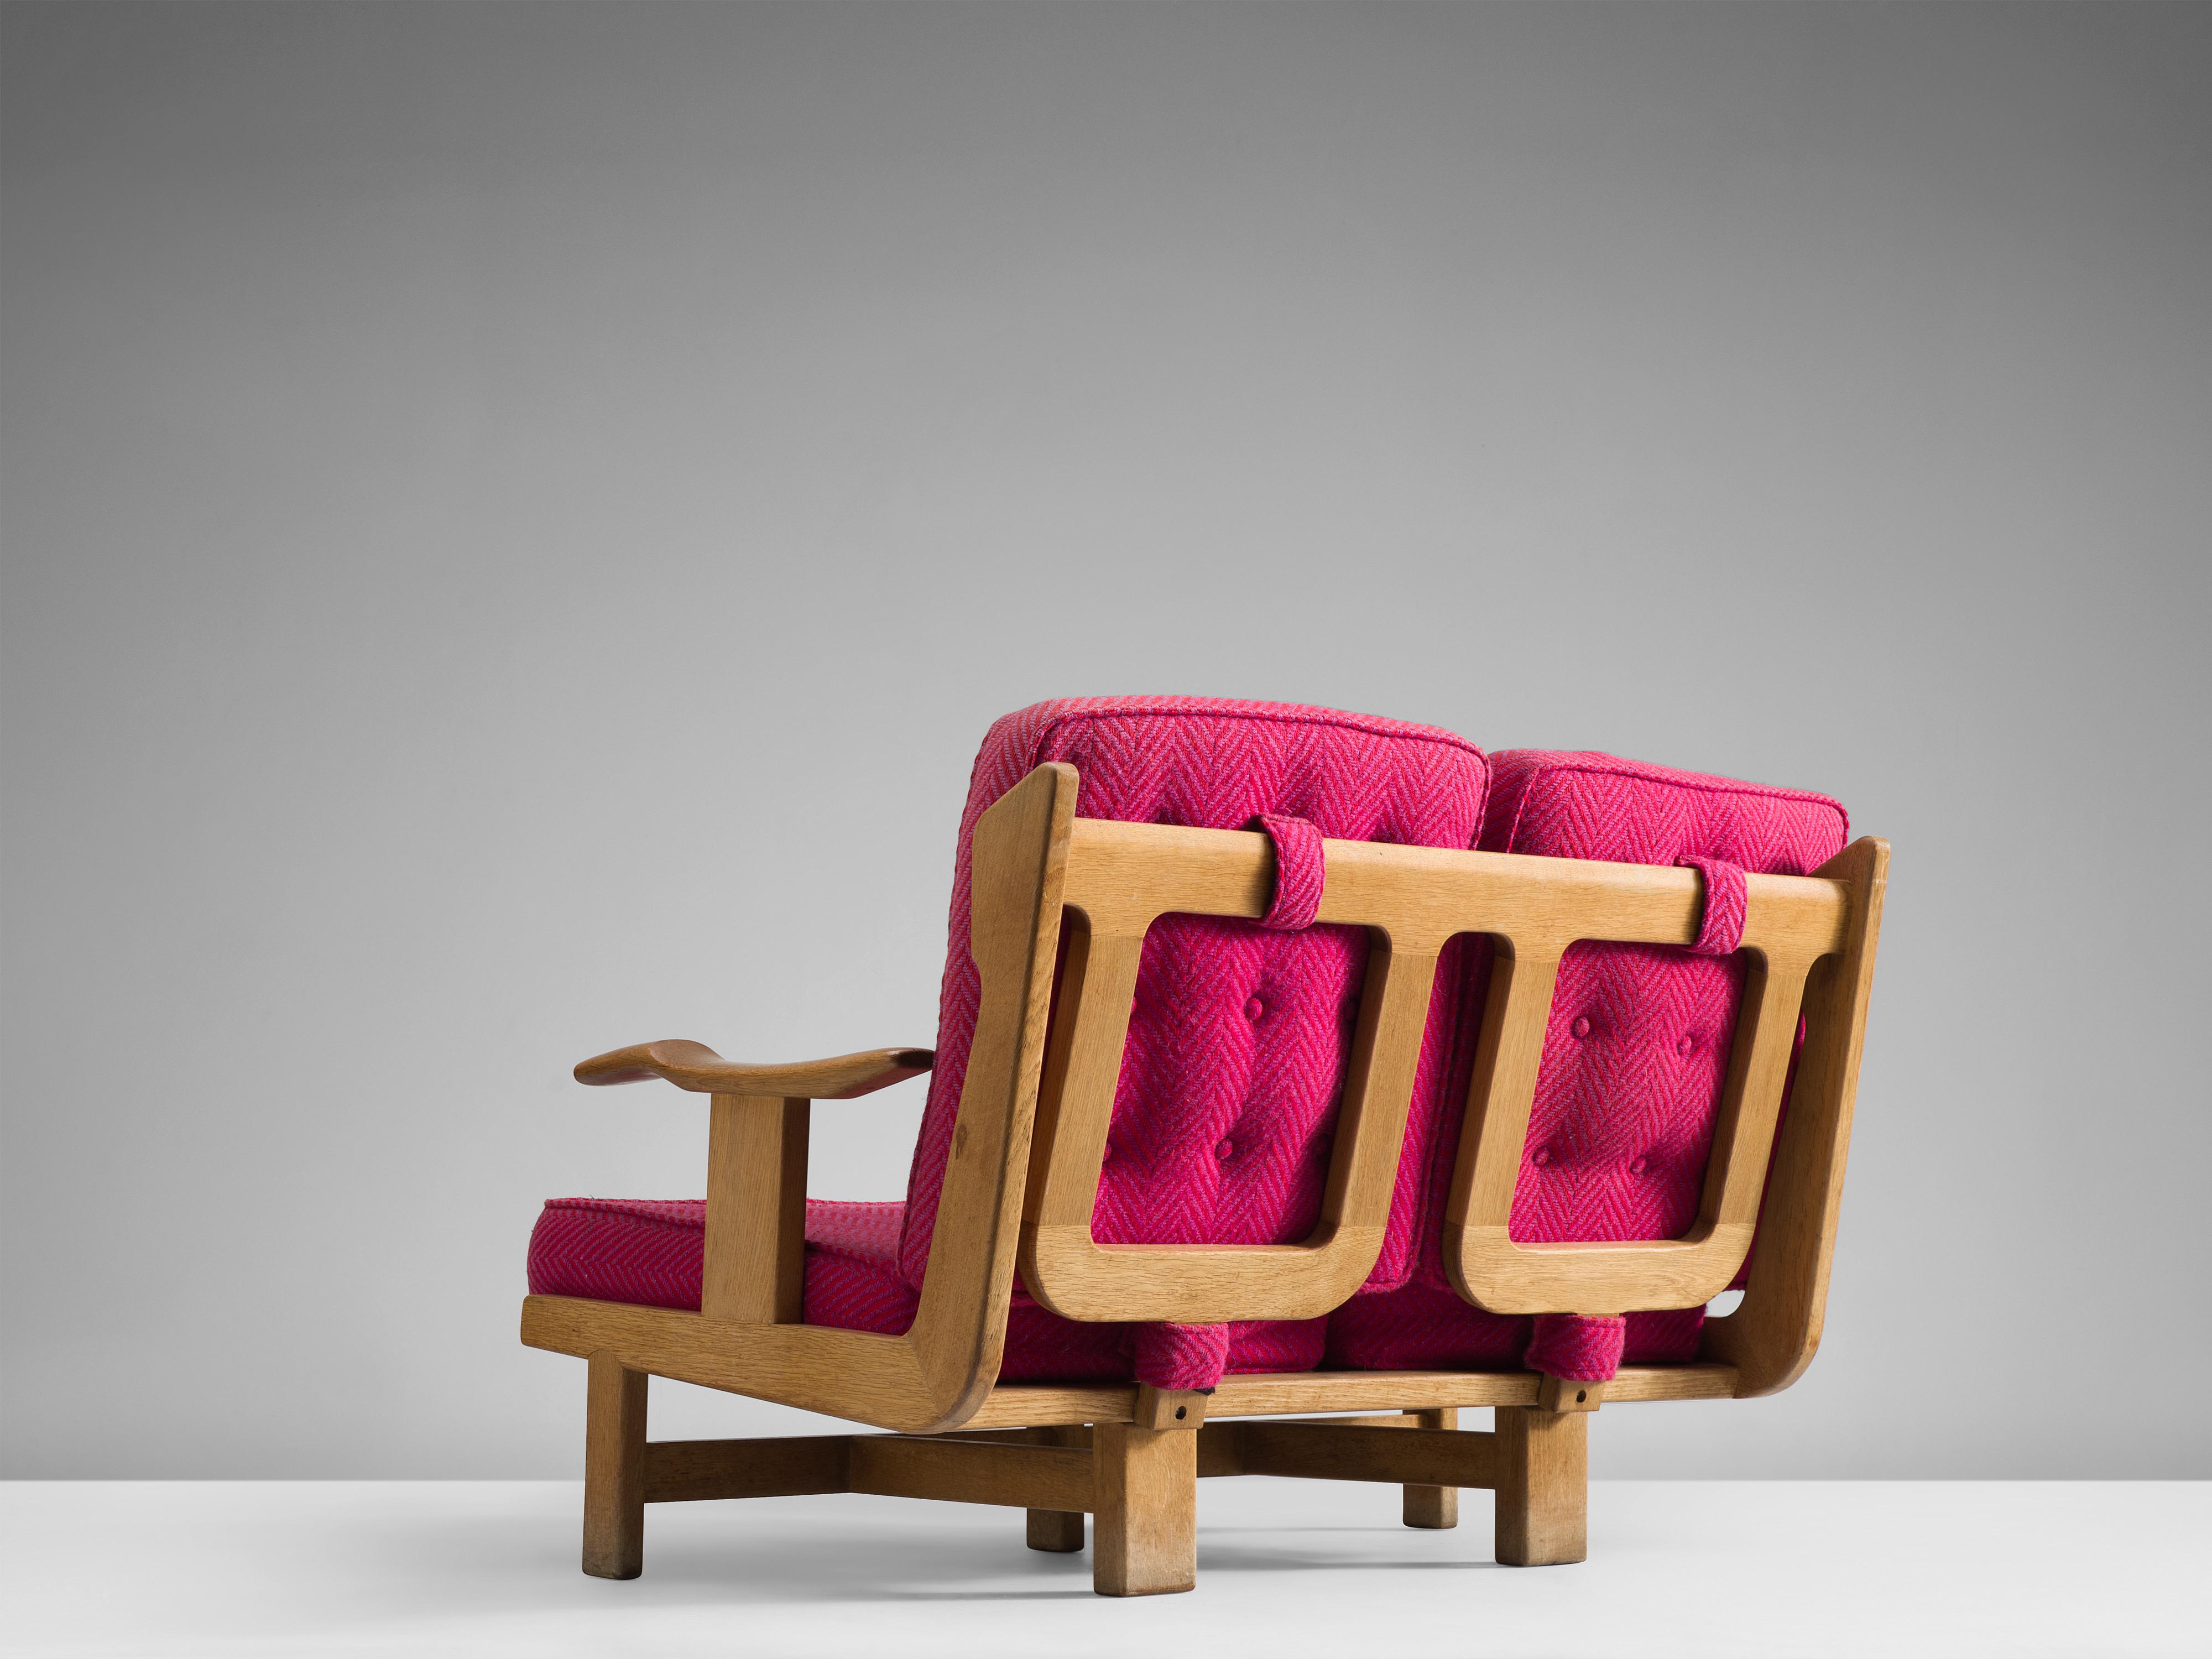 Solid two-seat Guillerme & Chambron oak sofa with pink upholstery, France, 1960s.

This sofa has a very interesting back and shows a variety of stunning shapes and well design lines, such as the armrest and the elegant bars in the back the sofa.